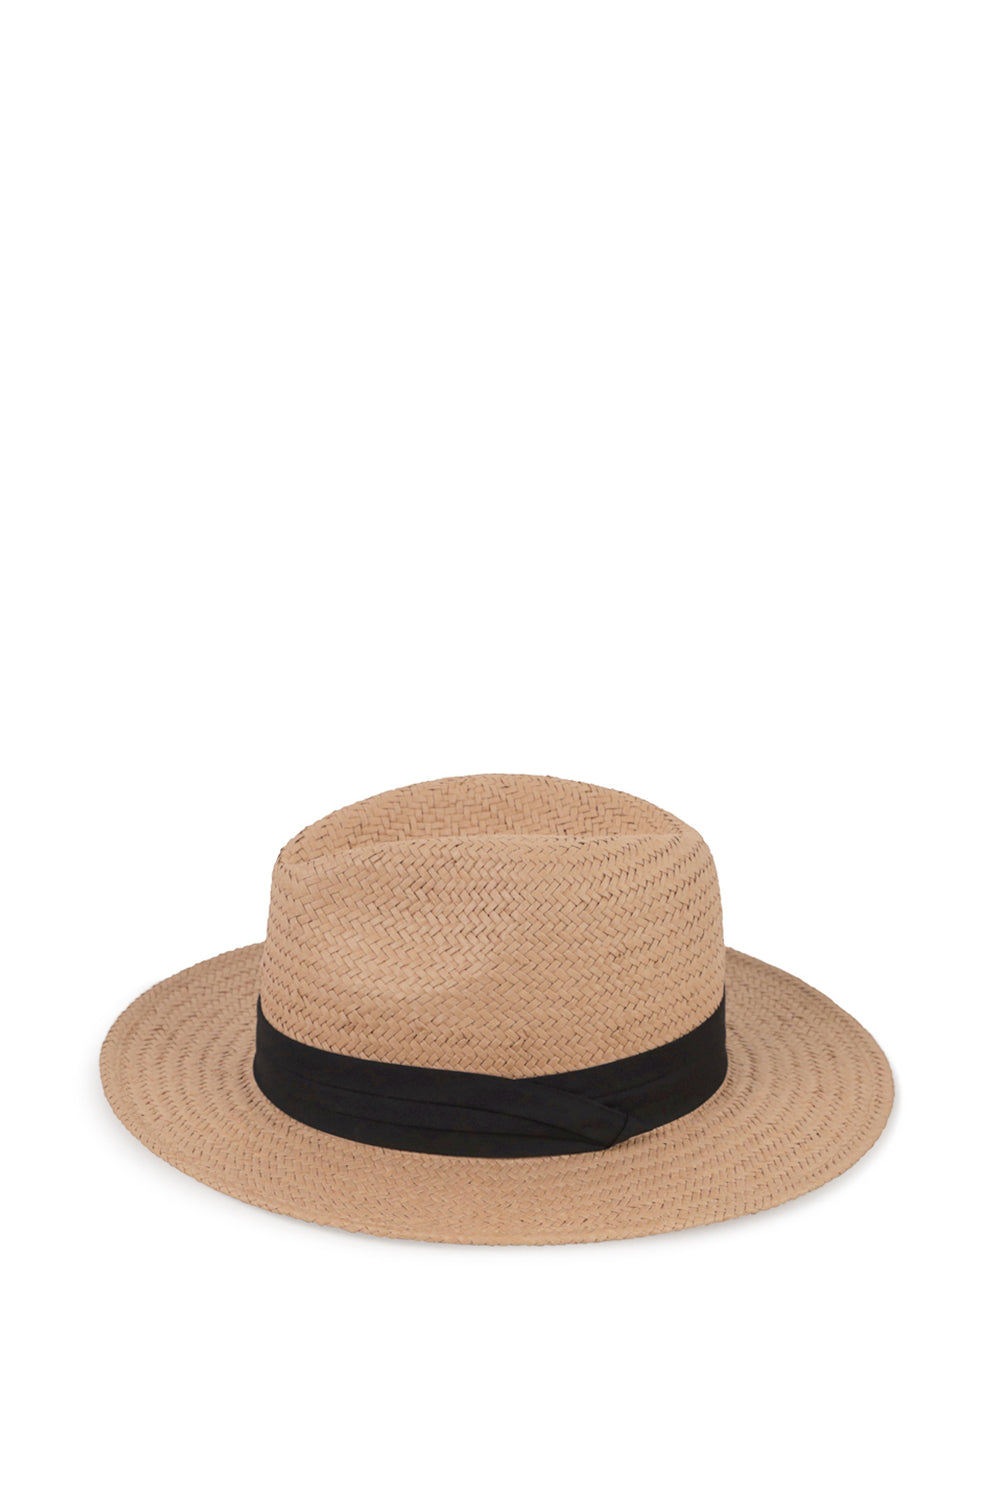 My Accessories London Straw fedora with Grosgrain Trim in Beige and Black | Beach | Holiday | Summer | Occasion | Races | Women's | Women's Accessories | Accessory | Hat | Hats | BBQ